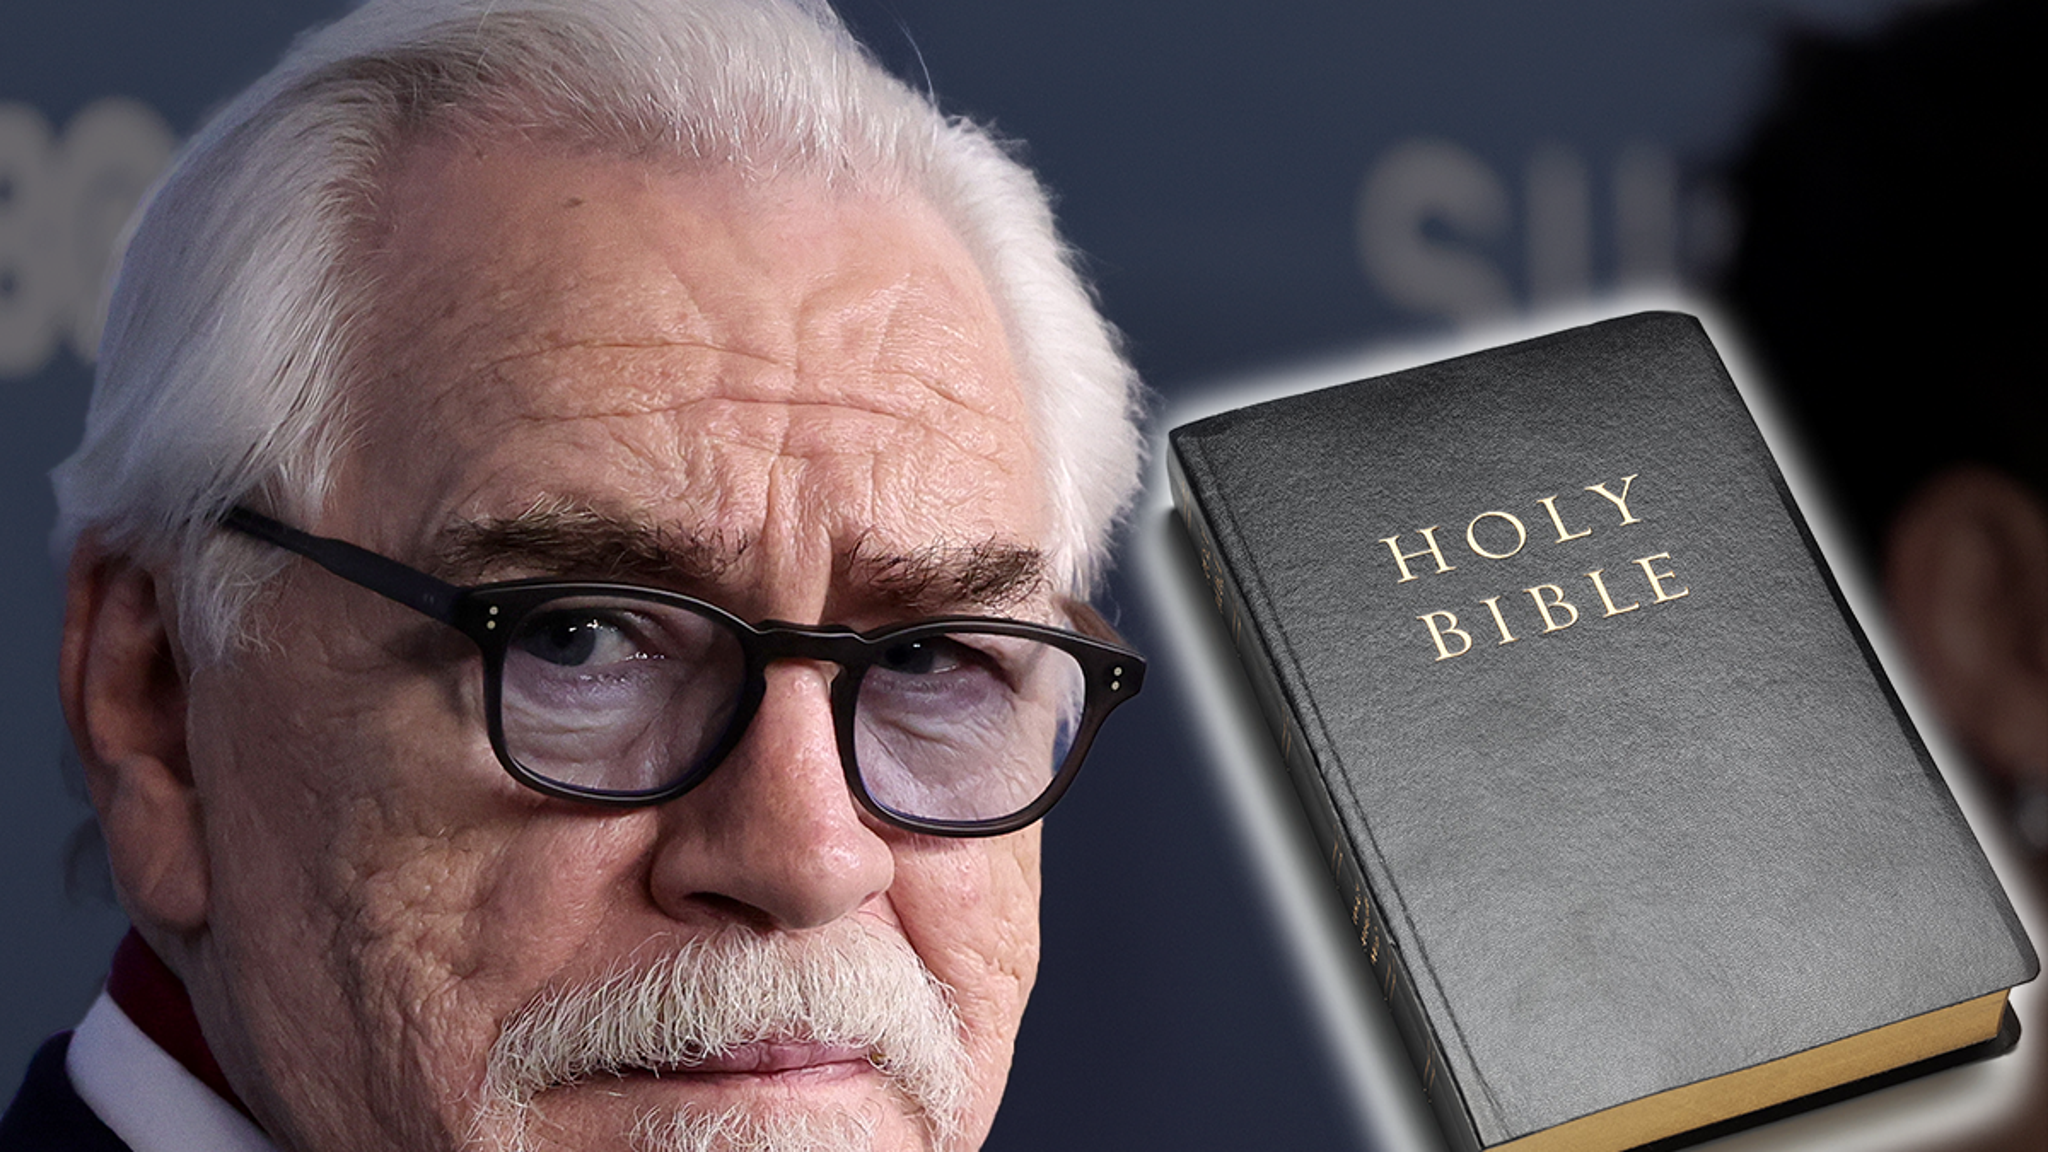 Brian Cox Says the Bible Is the Worst Book Ever, Slams Organized Religion